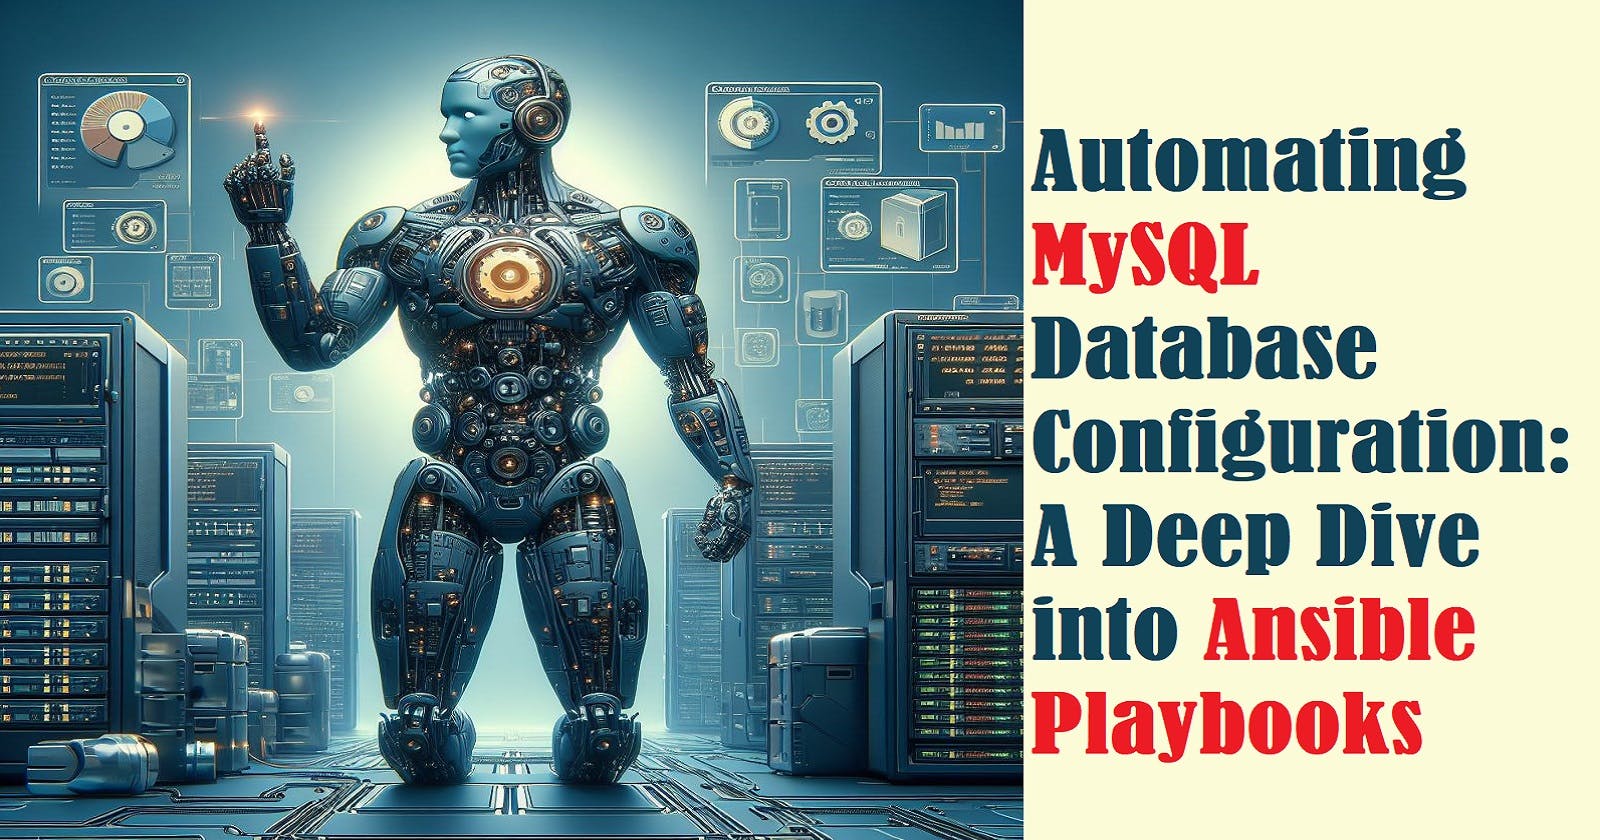 Automating MySQL Database Configuration: A Deep Dive into Ansible Playbooks